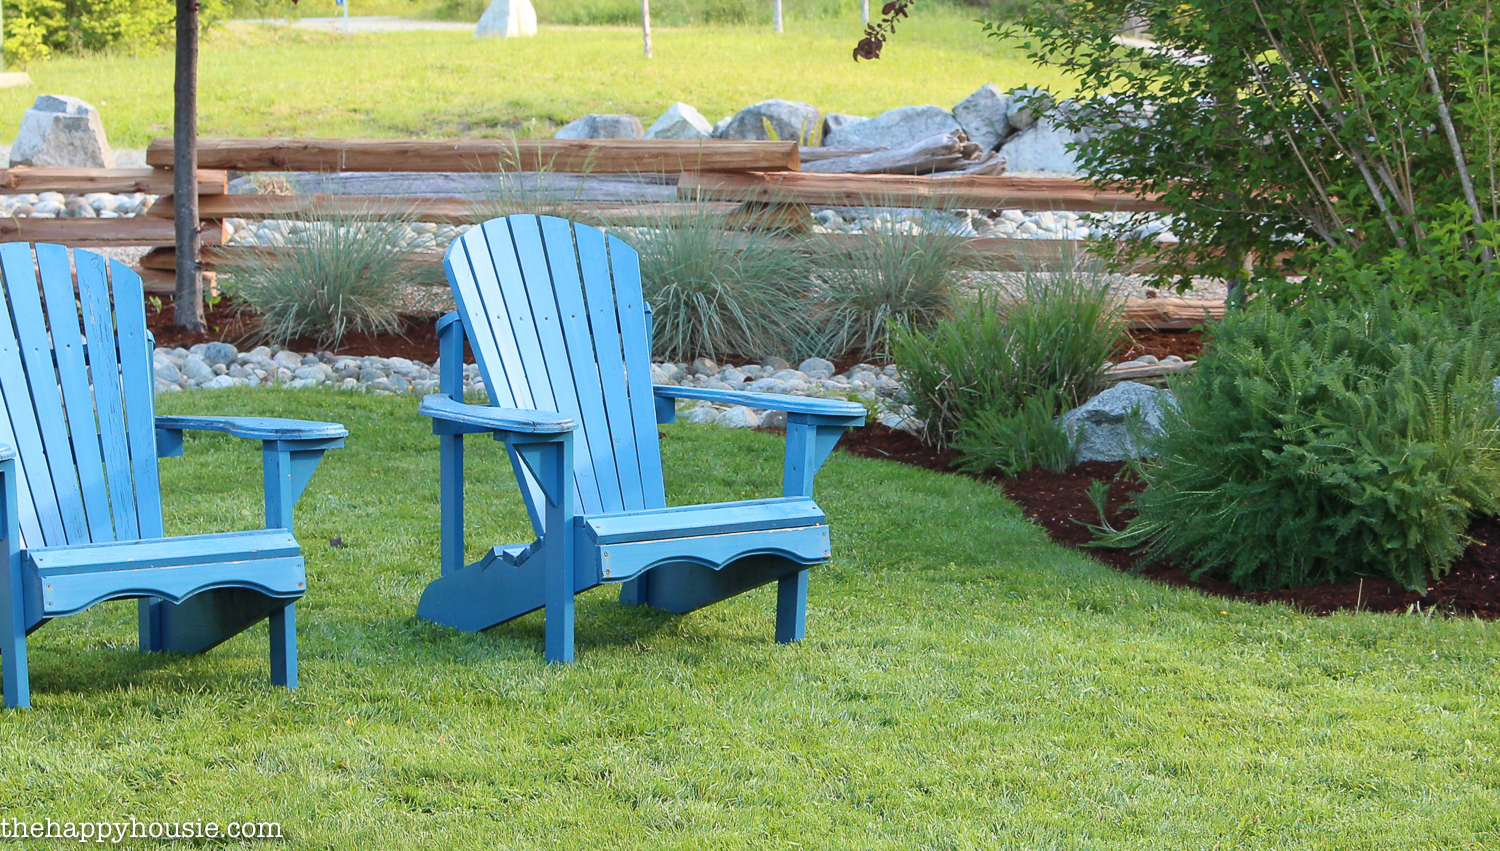 Two blue Adirondack chairs on the lawn of the house.